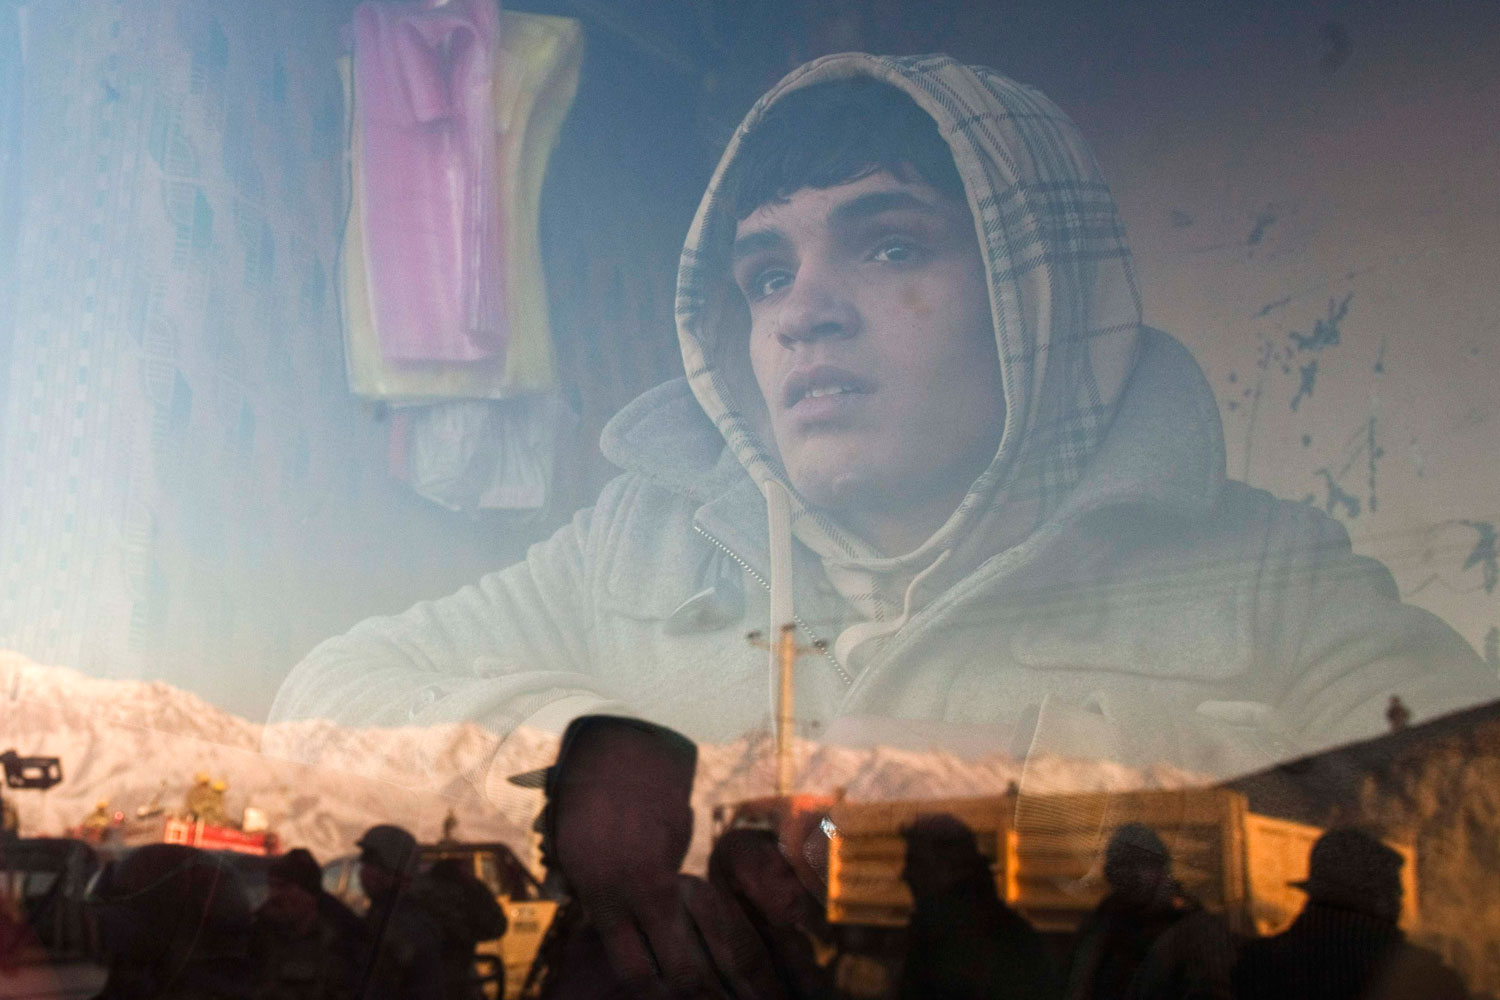 February 24, 2012.  An Afghan boy who works at a bakery watches a protest outside his a window in Kabul. Twelve people were killed on Friday in the bloodiest day yet in protests that have raged across Afghanistan over the desecration of copies of the Muslim holy book at a NATO military base with riot police and soldiers on high alert braced for more violence.